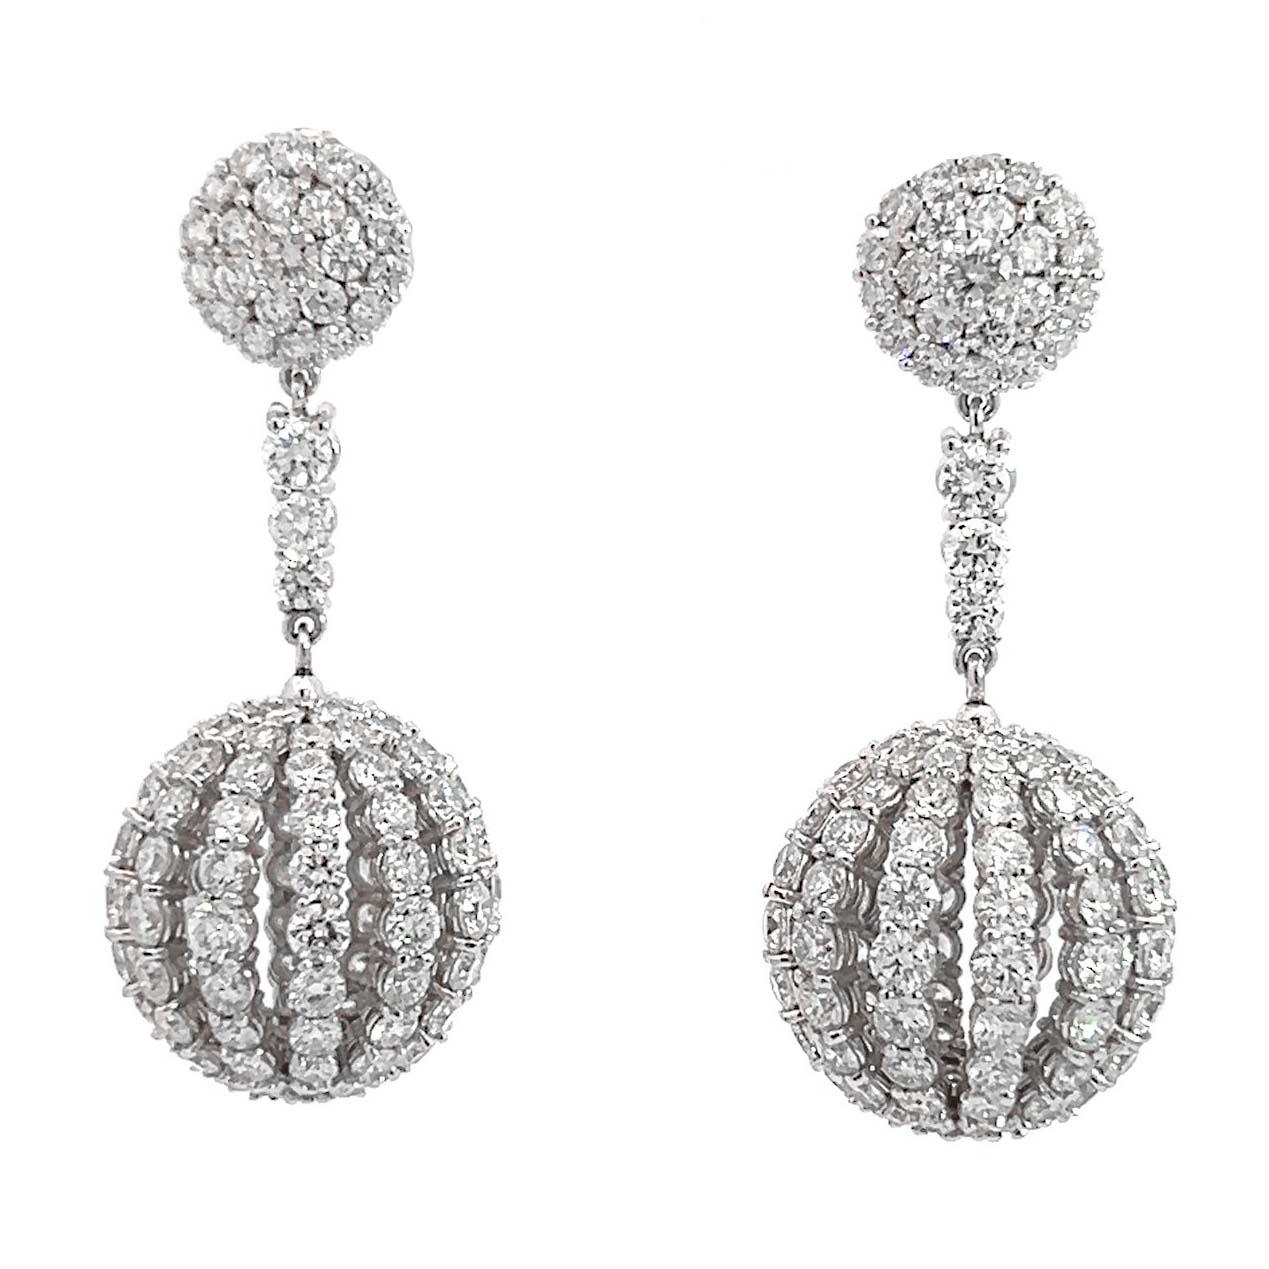 18-karat white gold diamond sphere earrings. This exquisite pair of dangle earrings boasts a dazzling array of 300 round brilliant white diamonds, totaling 13 carats. 
Crafted with meticulous attention to detail, each earring features a paved stud